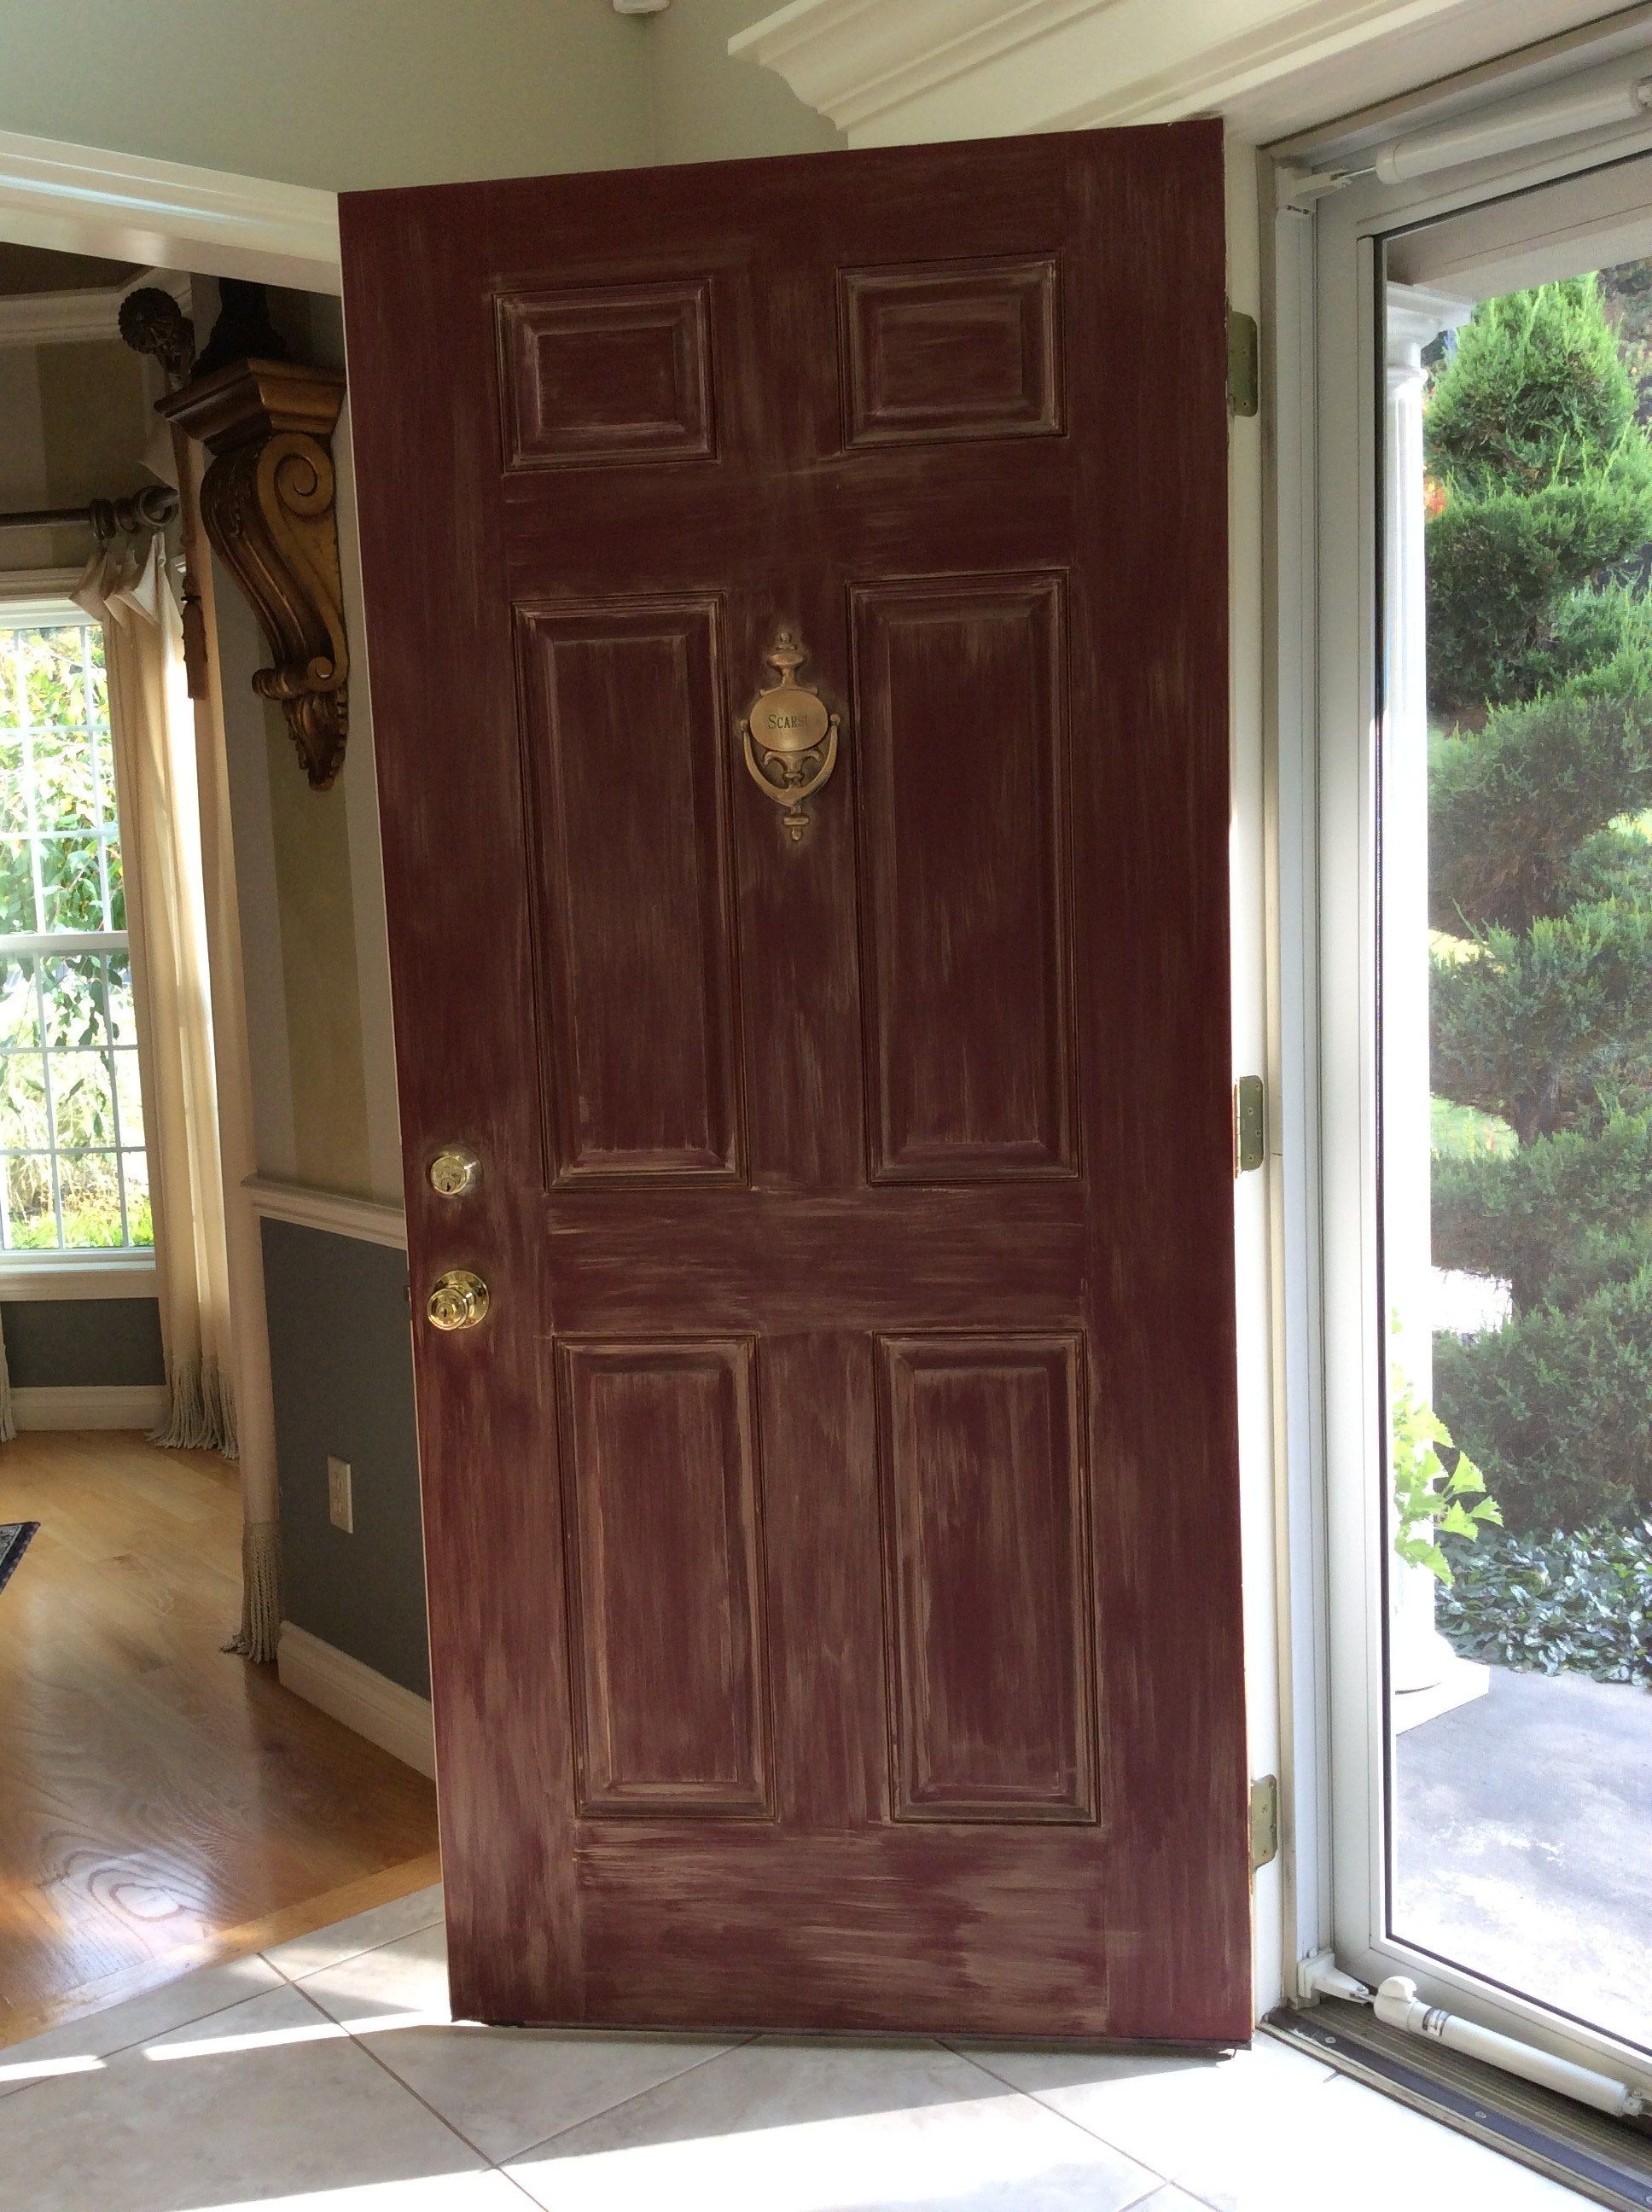 Designer Amy's awesome #DIY front door remodel! houseofbrightideas ...